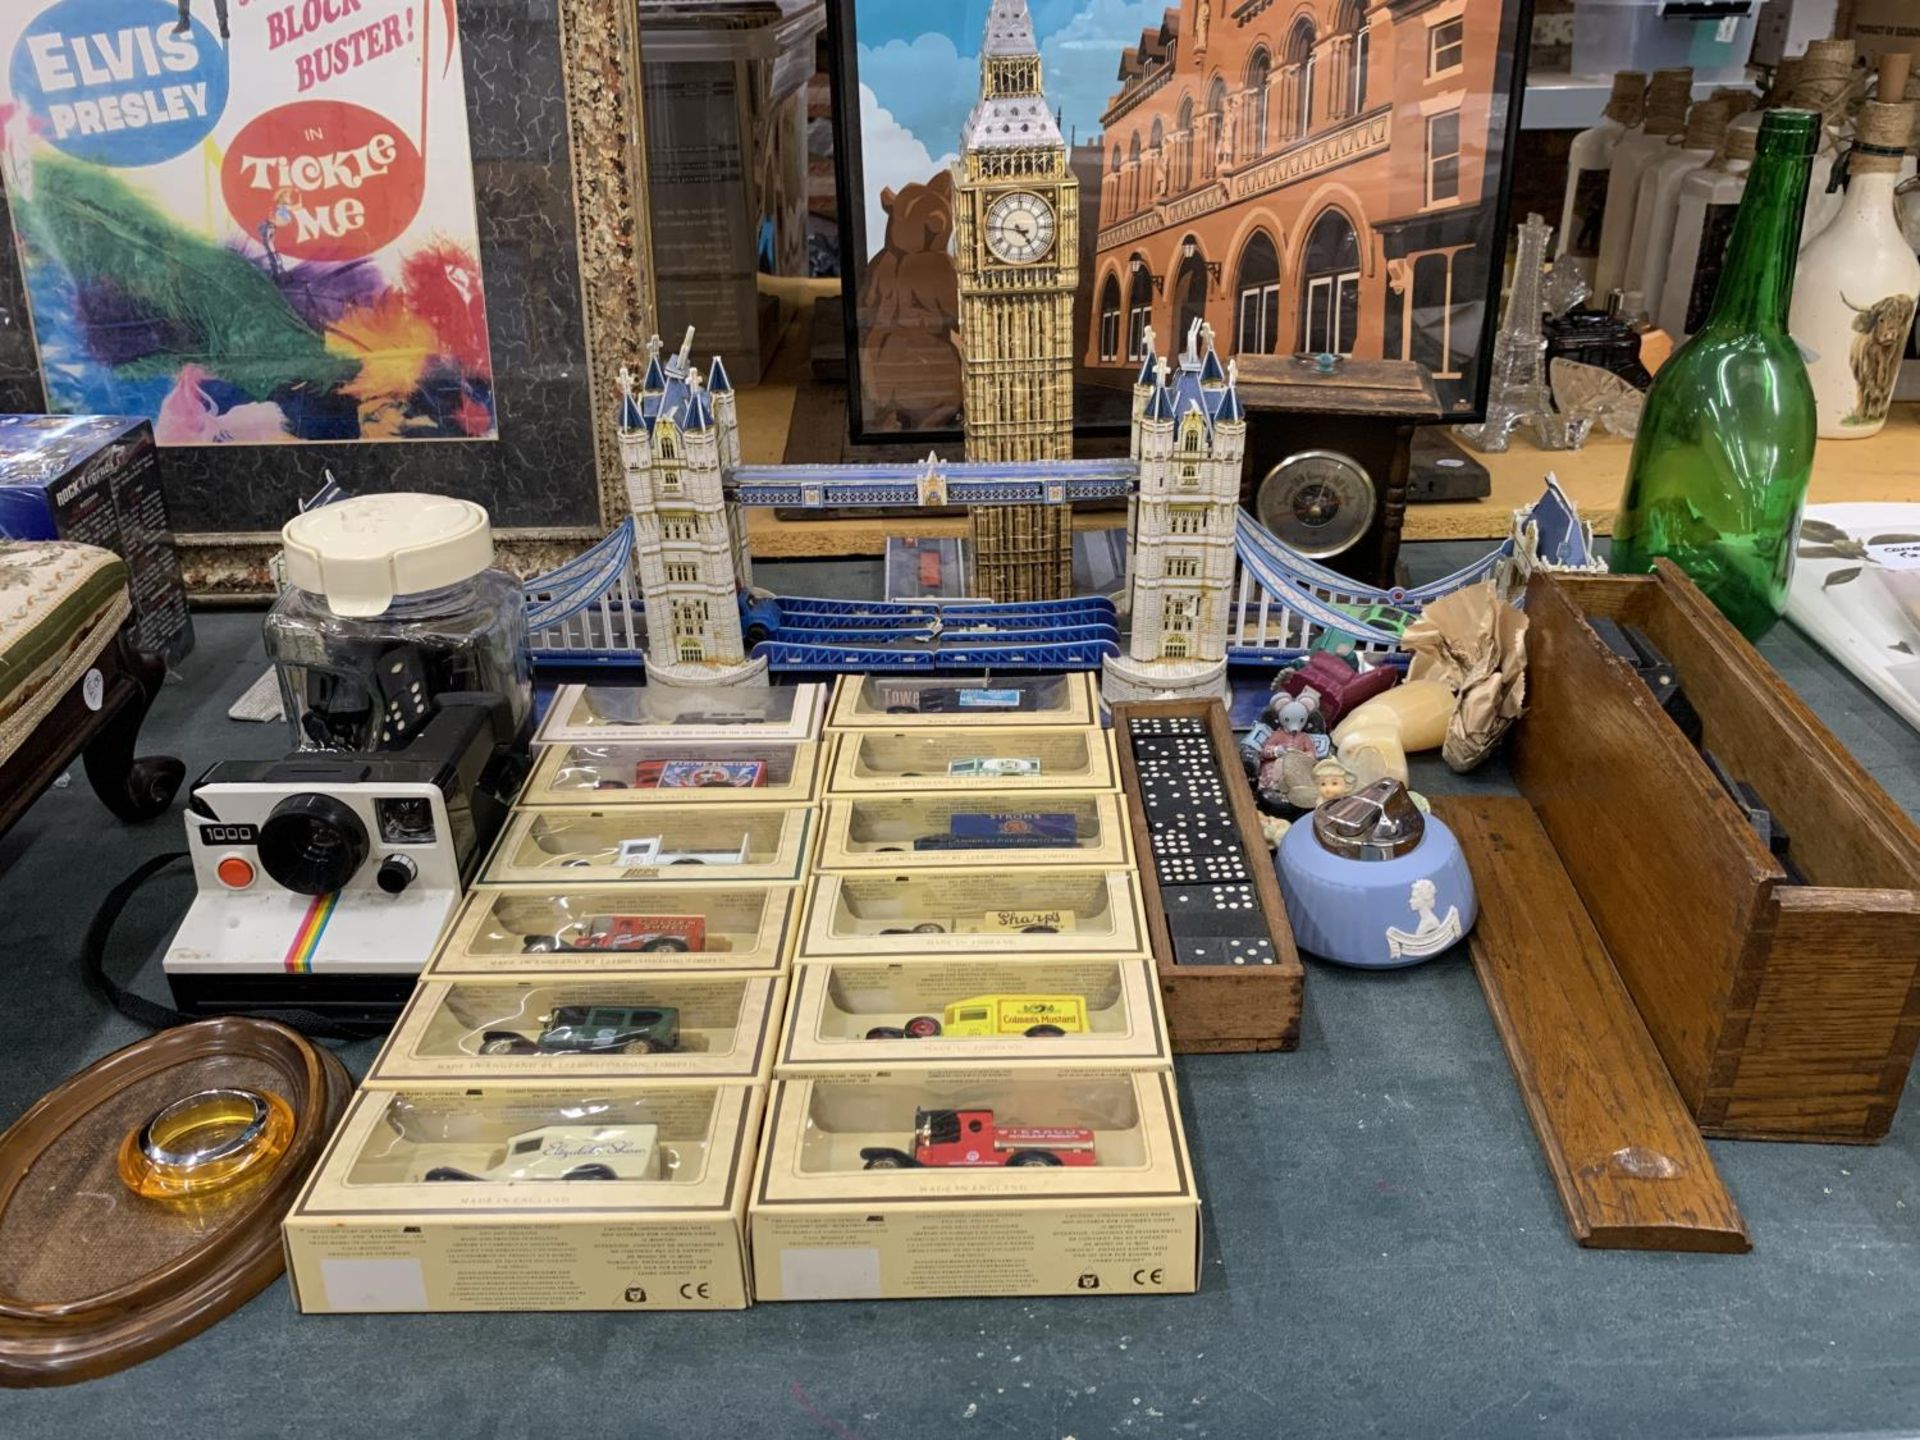 A LARGE MIXED LOT OF TOYS TO INCLUDE CARD MODELS OF TOWER BRIDGE AND BIG BEN, FIGURES, DOMINOES PLUS